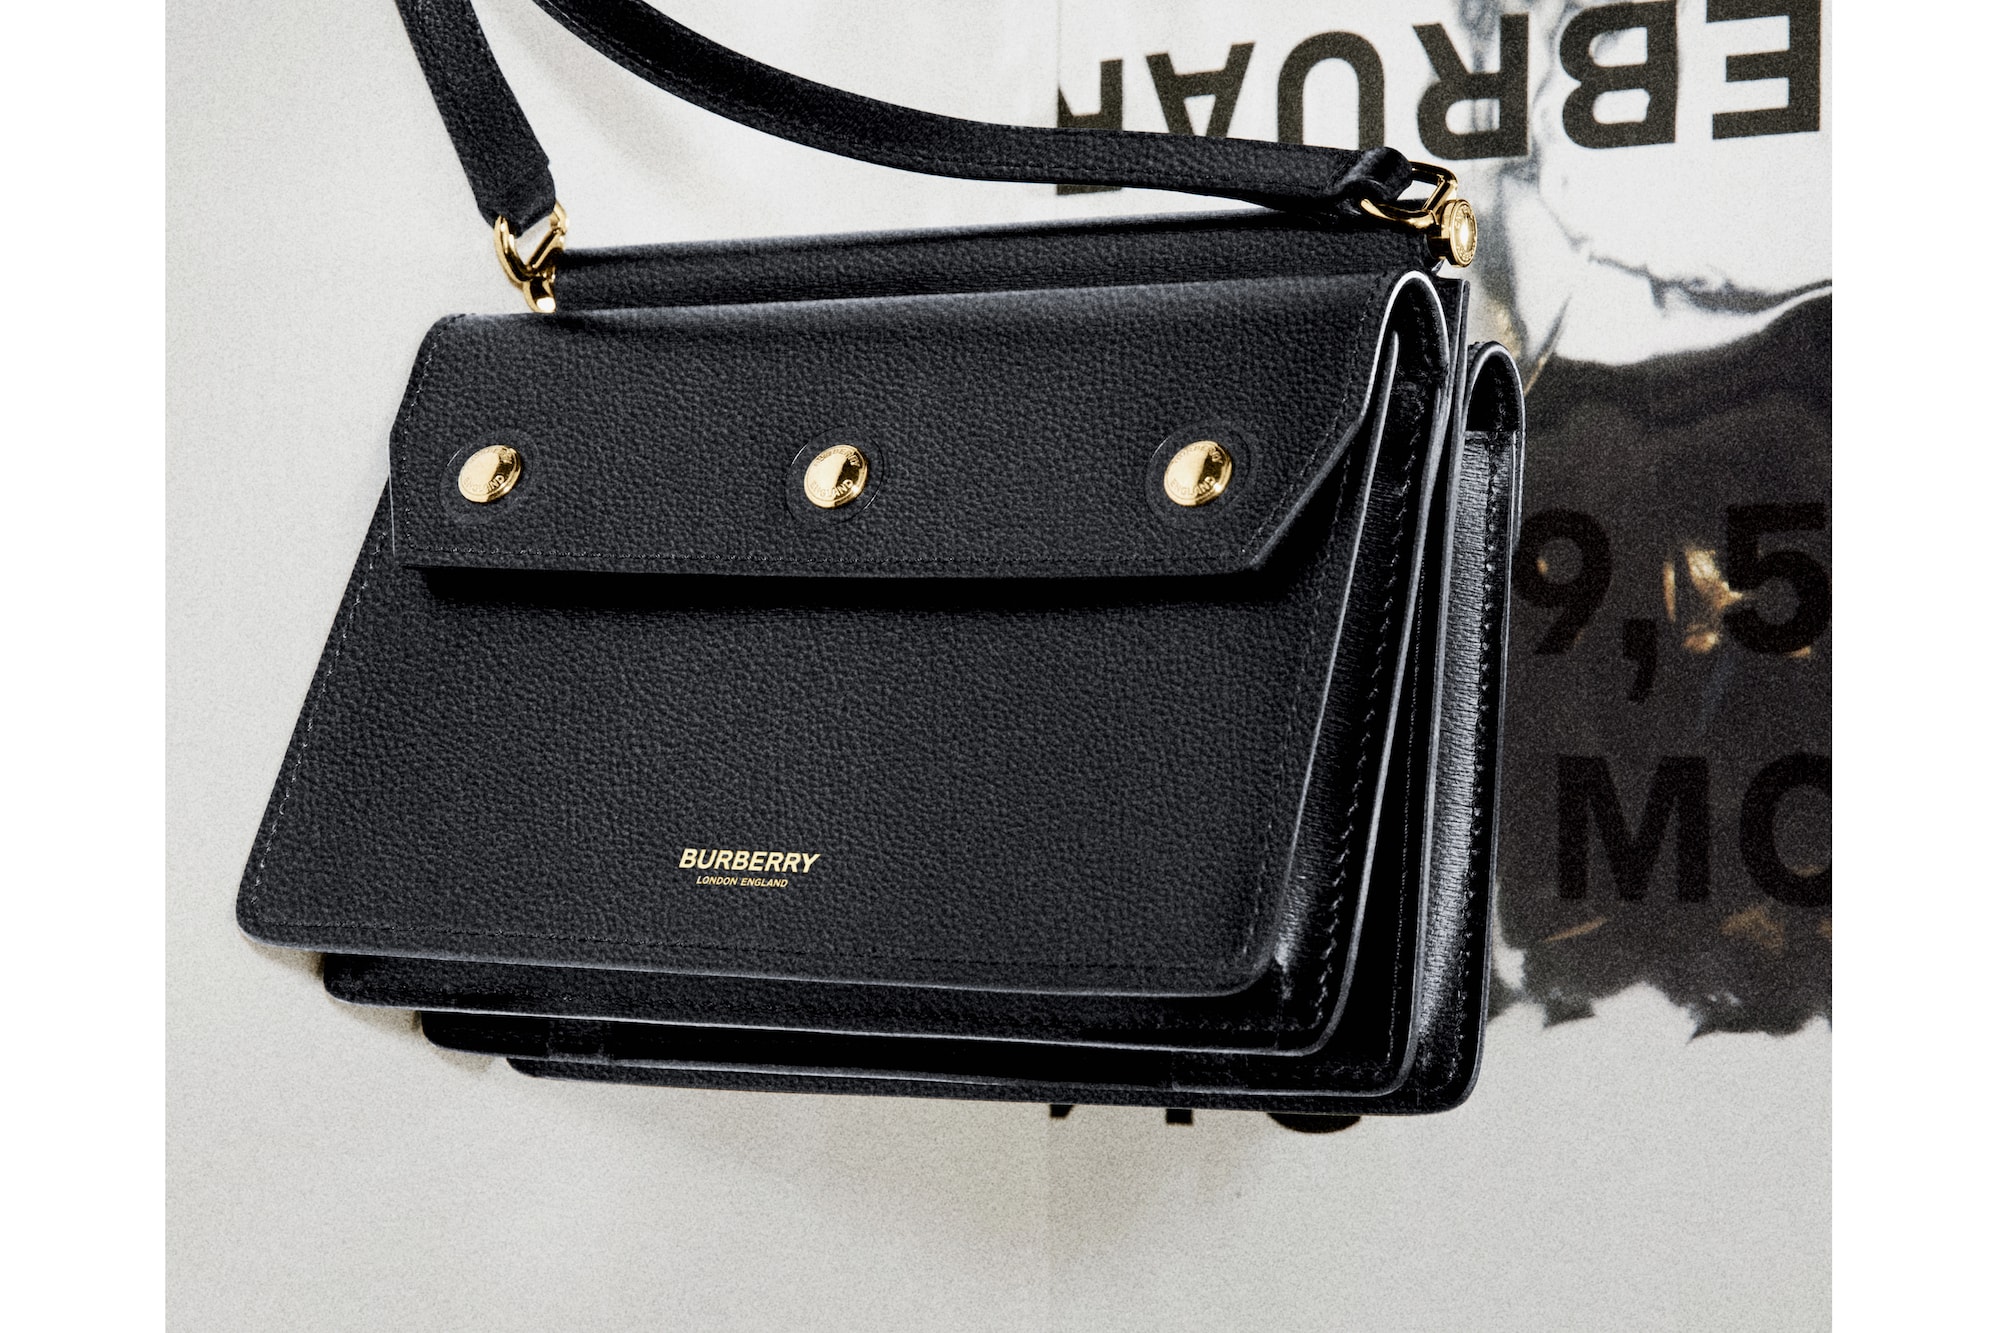 Burberry B Series Mini Title Bag Drop Release Fall Winter 2019 Runway Collection Date 